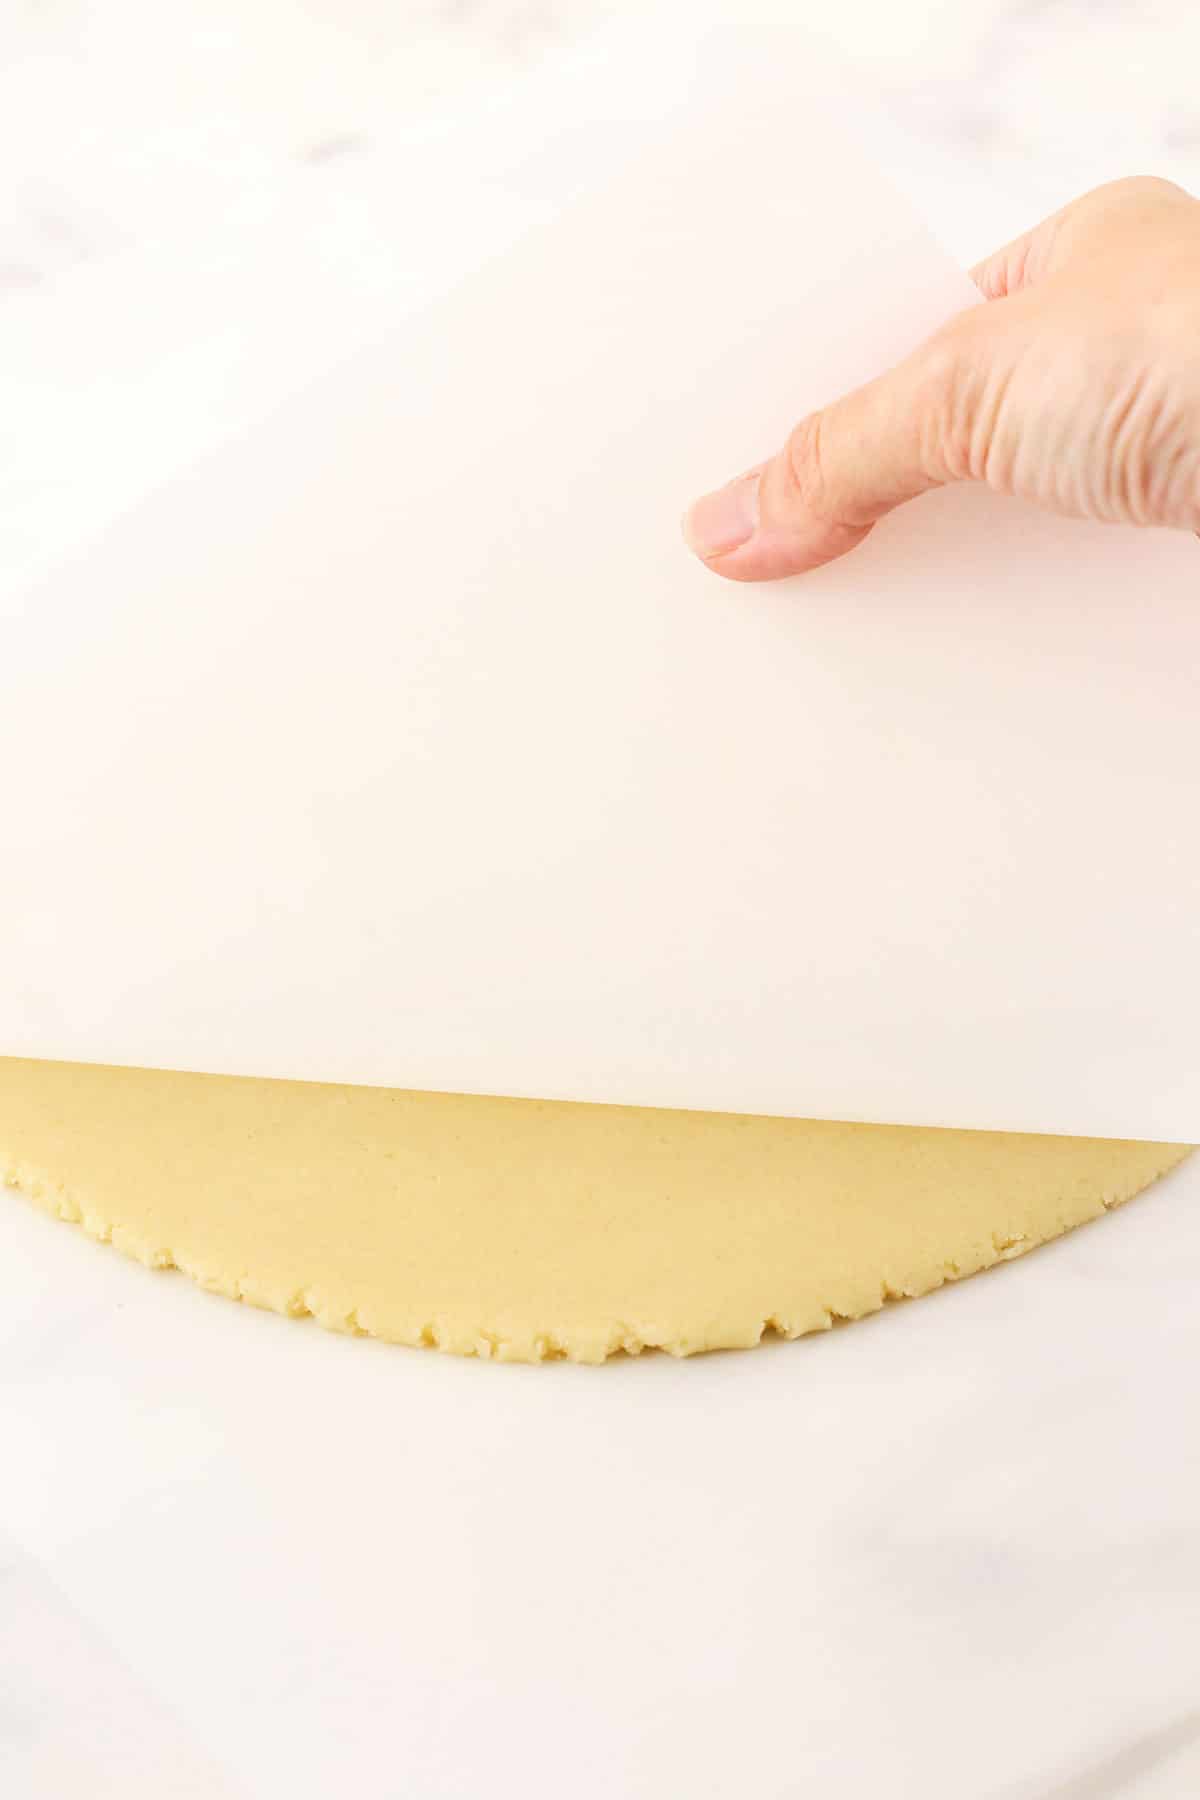 A rolled-out slab of dough between two layers of parchment paper